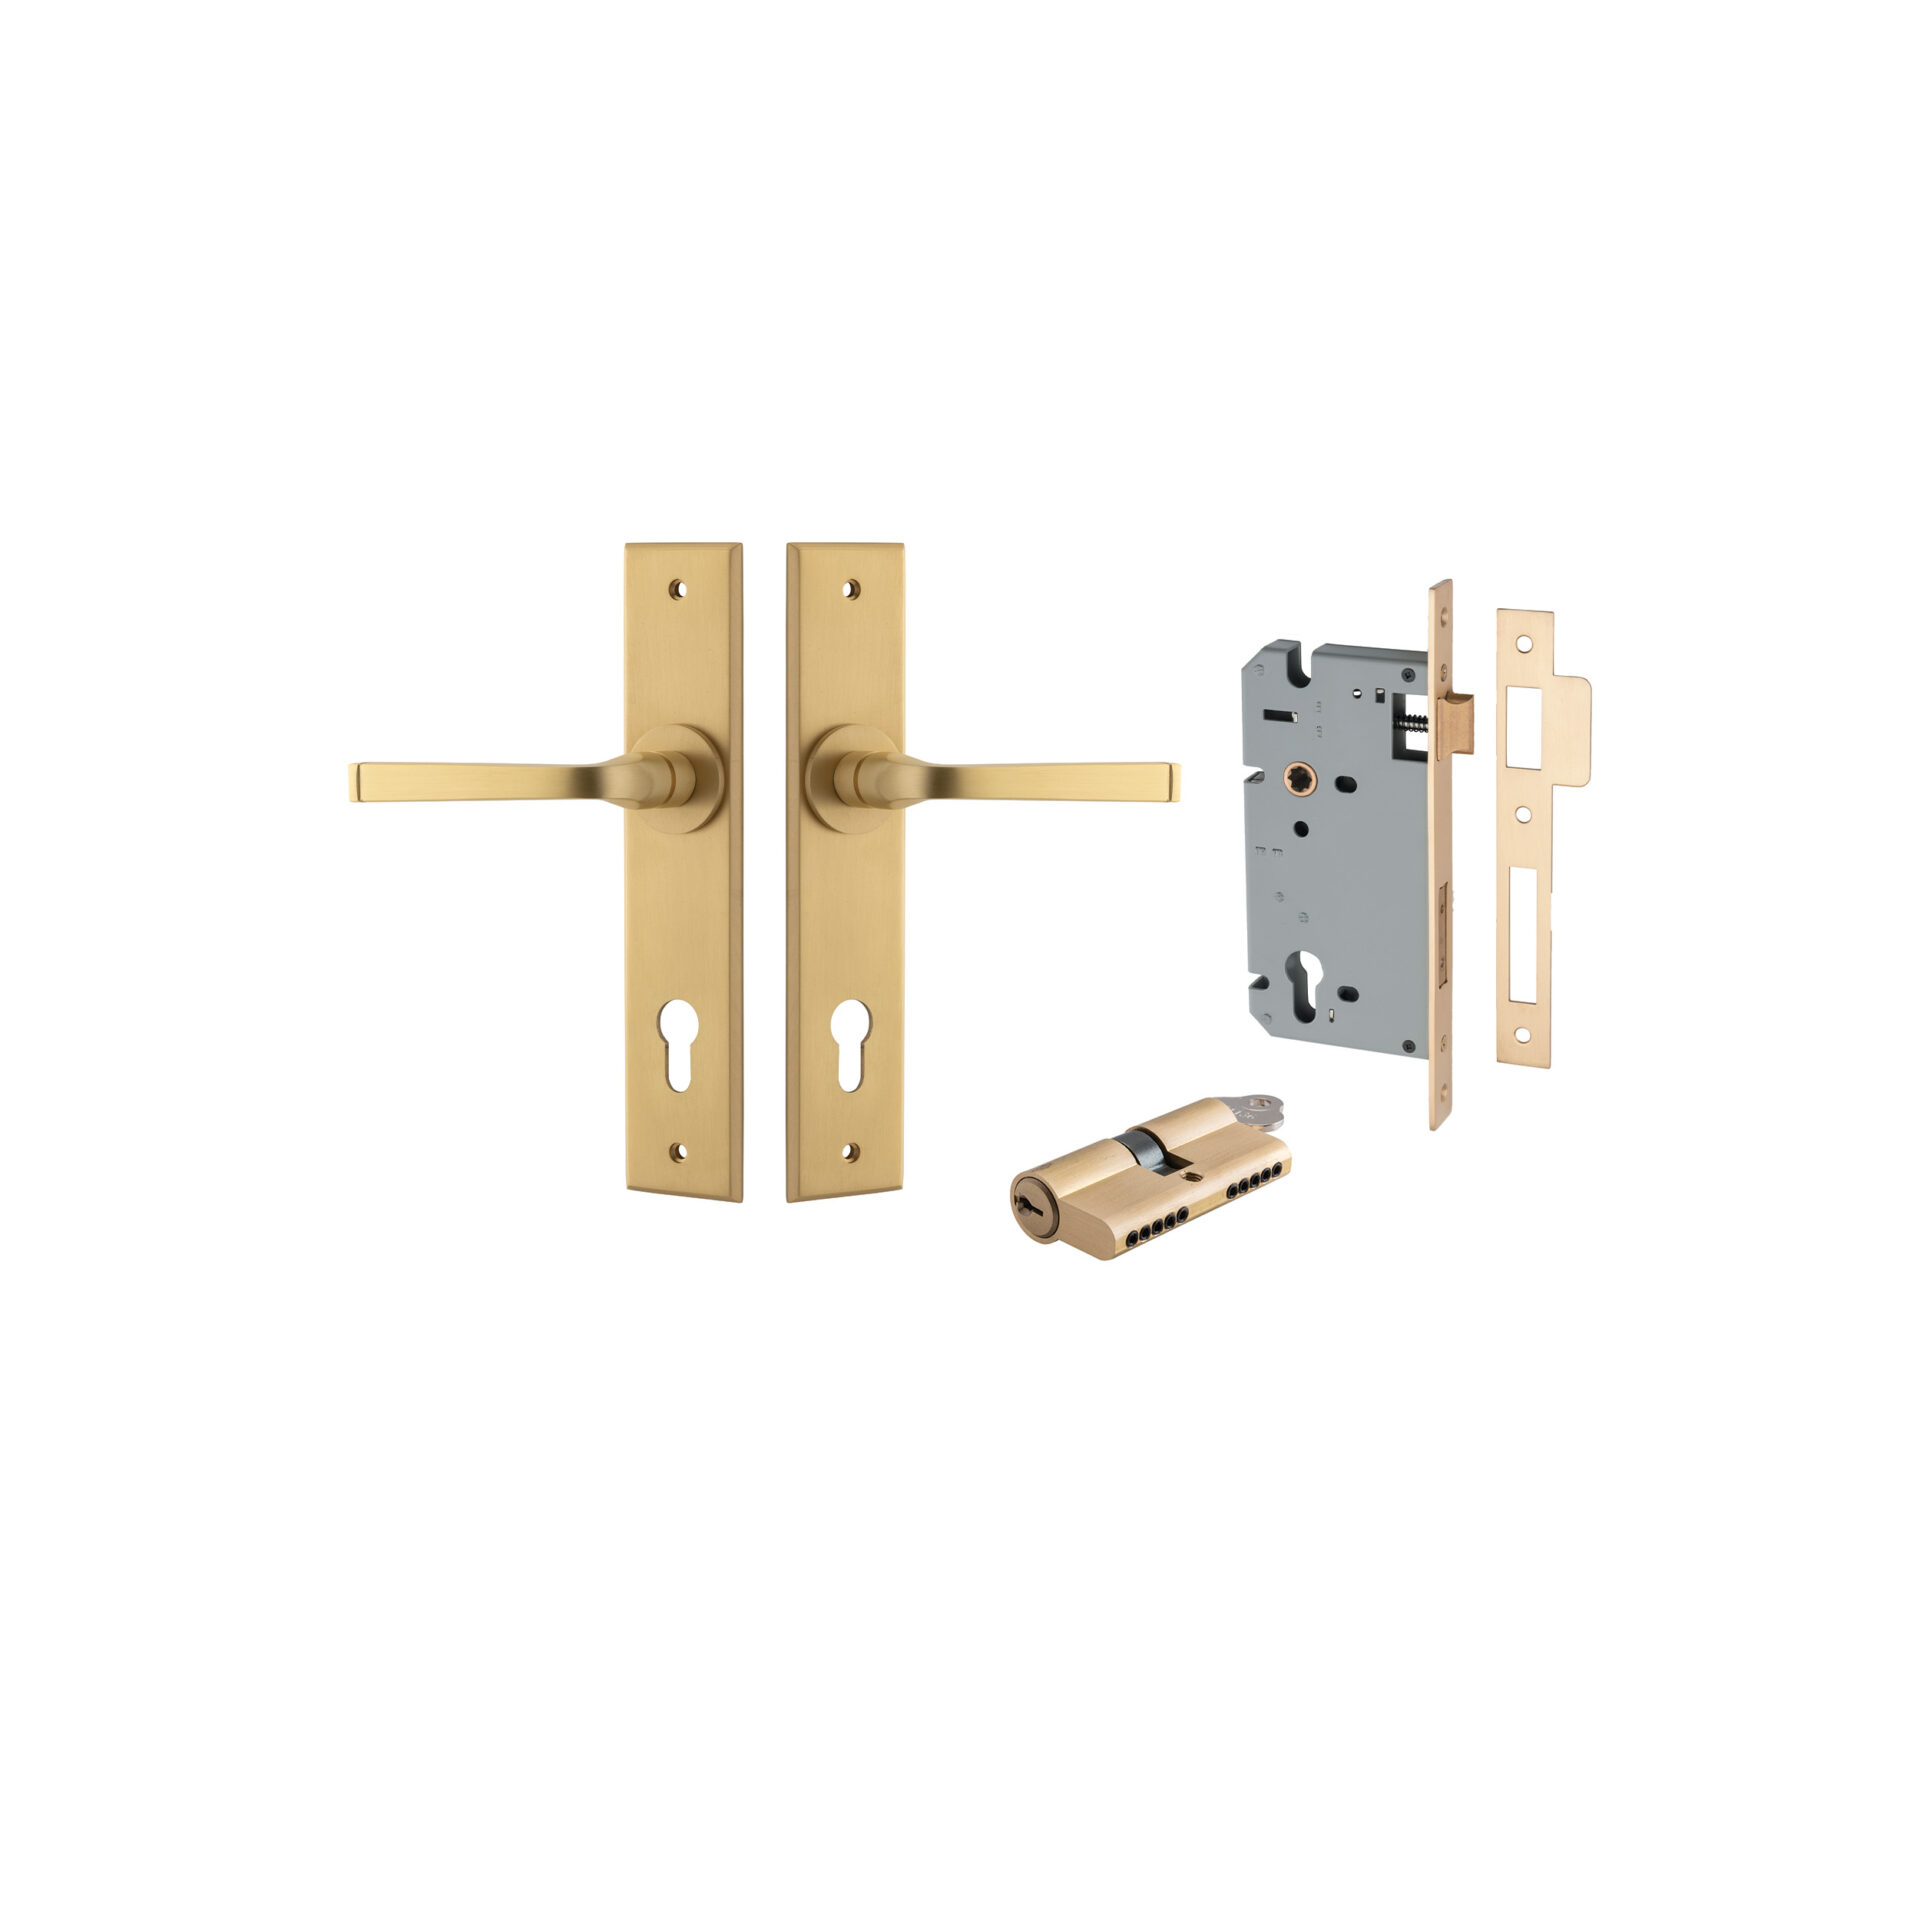 15288KENTR60KK - Annecy Lever - Chamfered Backplate Entrance Kit with High Security Lock - Brushed Brass - Entrance